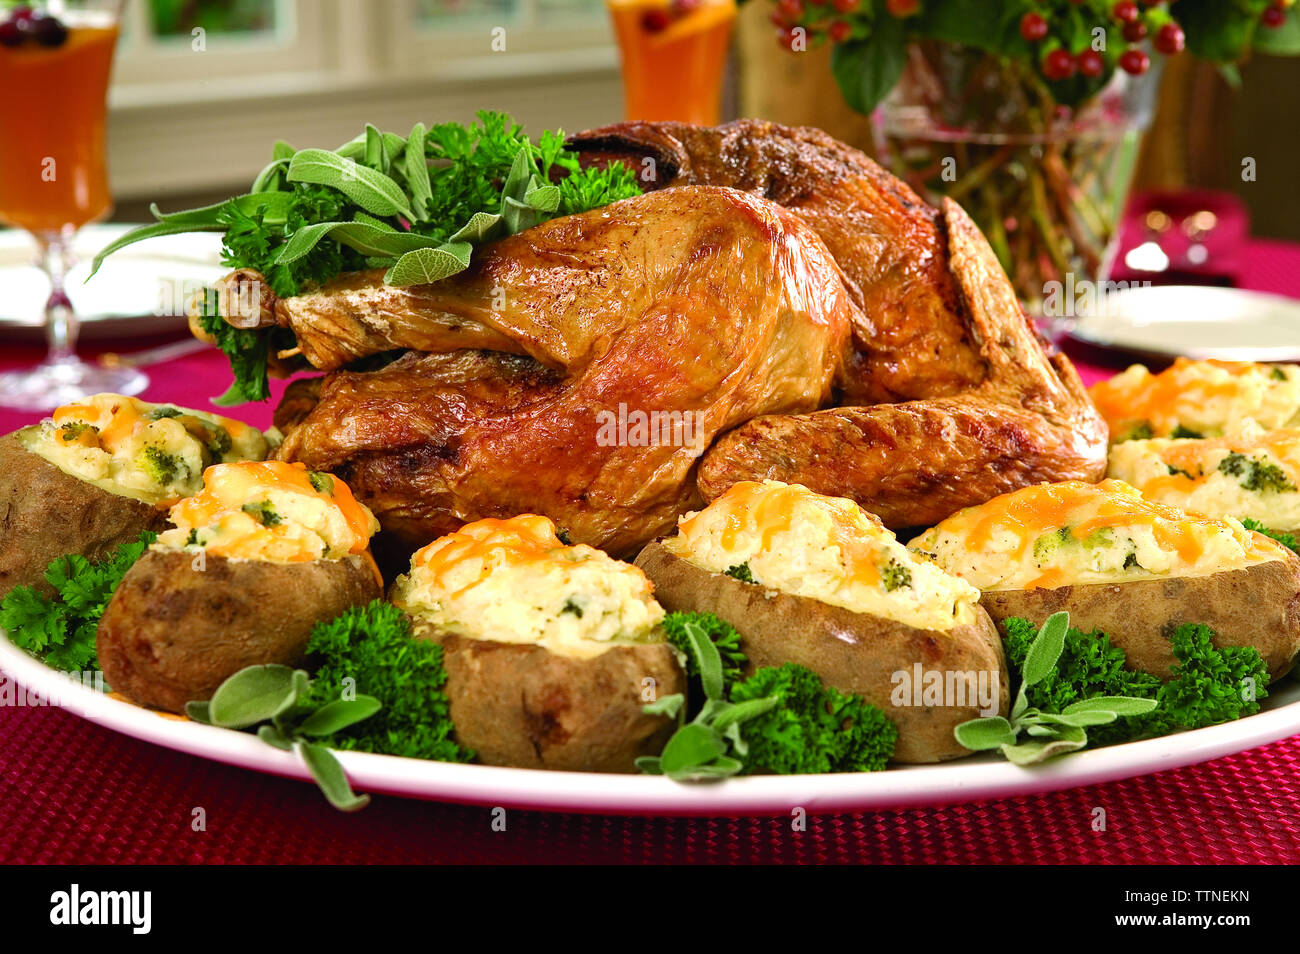 Close-up of roasted turkey meat with boiled potatoes and herbs on dining table at home Stock Photo